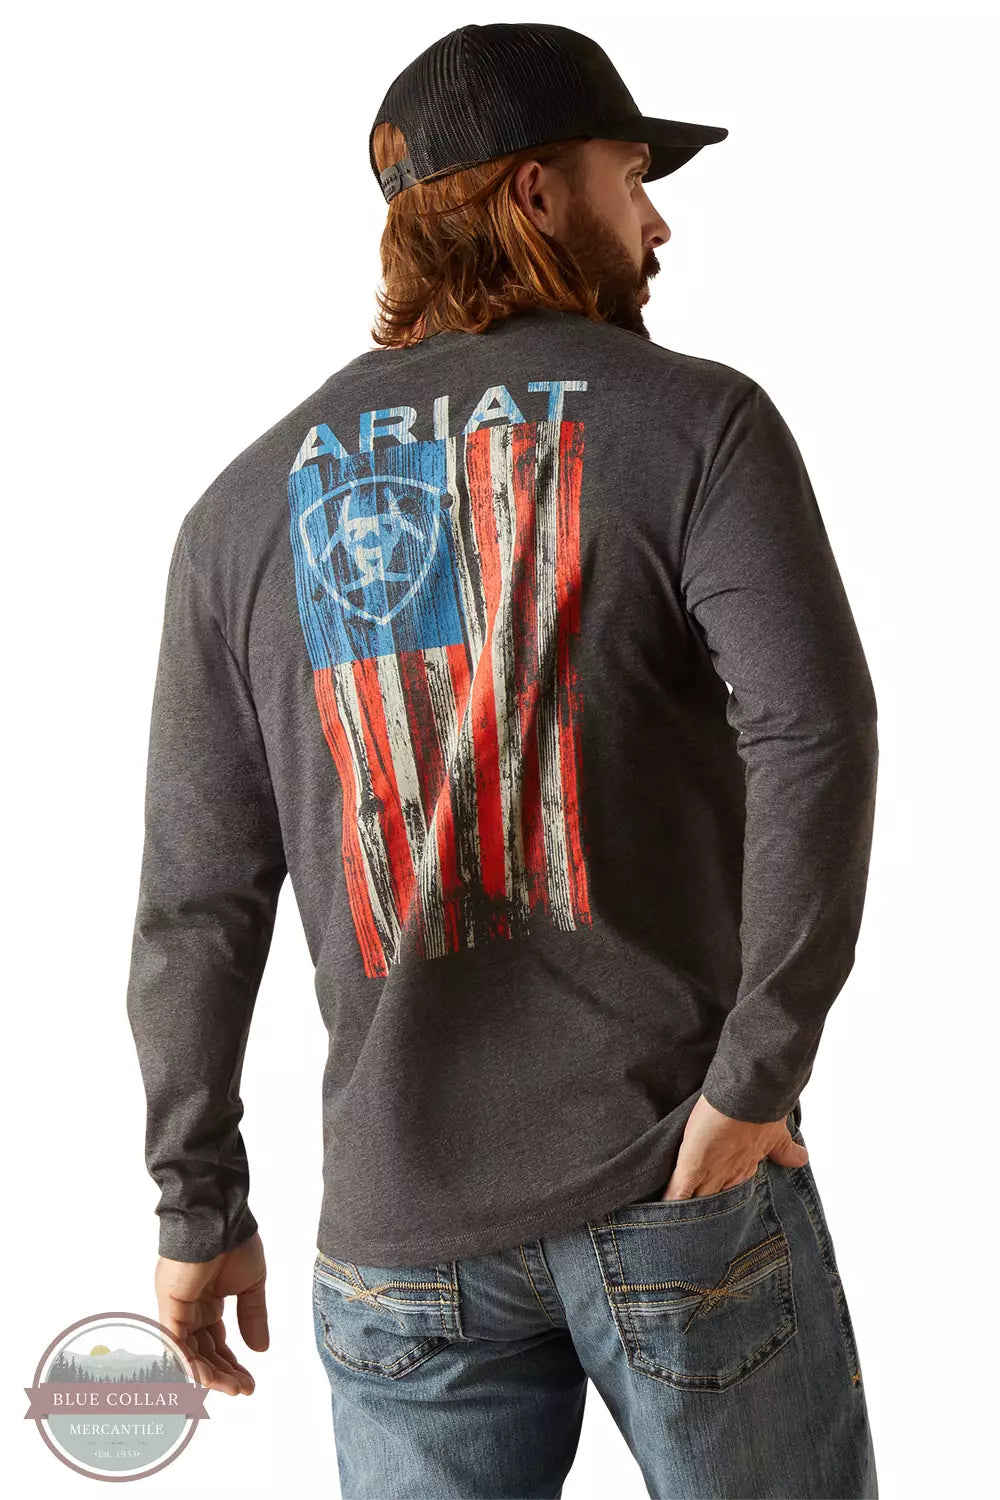 Ariat 10047929 Wooden Flag Long Sleeve T-Shirt in Charcoal Heather Back View